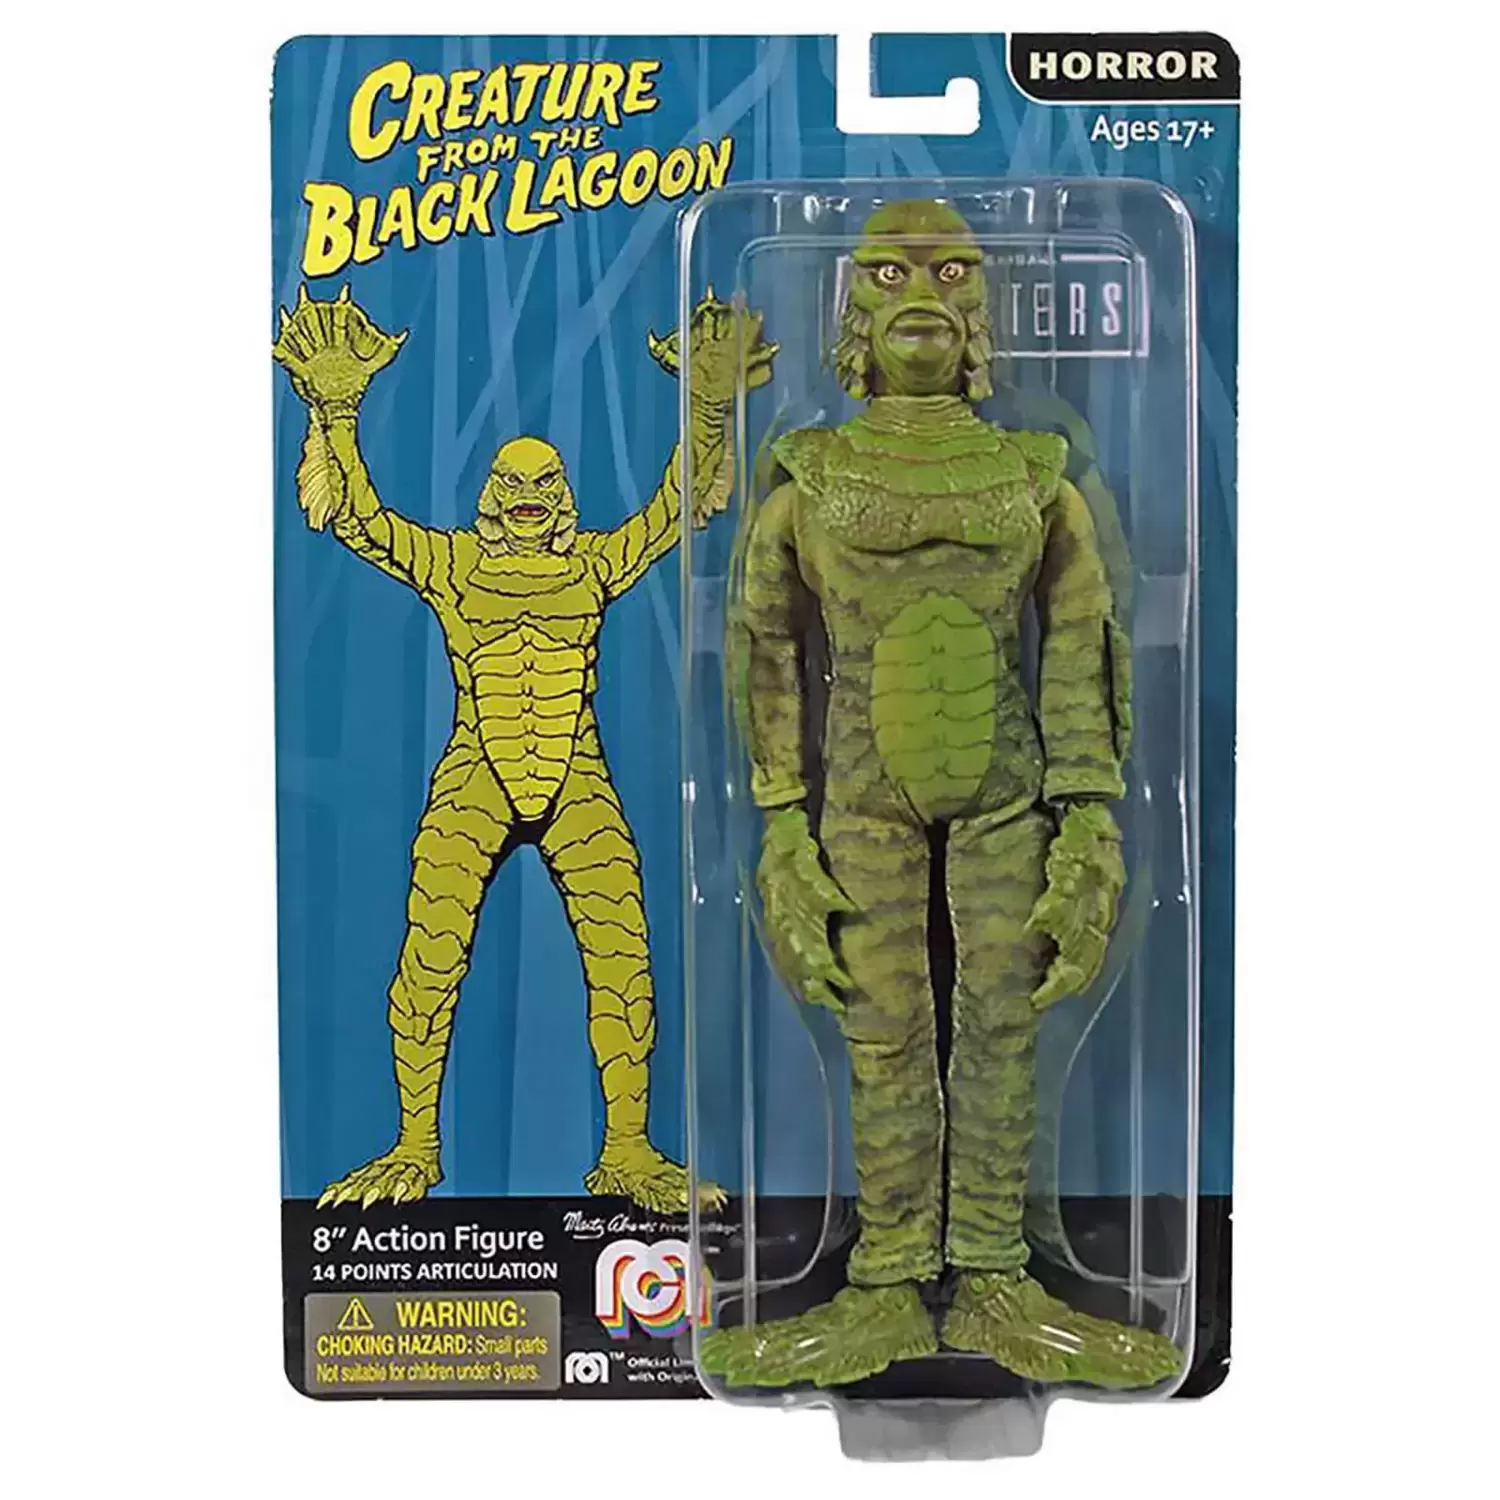 Mego Horror Action Figures - Universal Monsters - Creature from the Black Lagoon